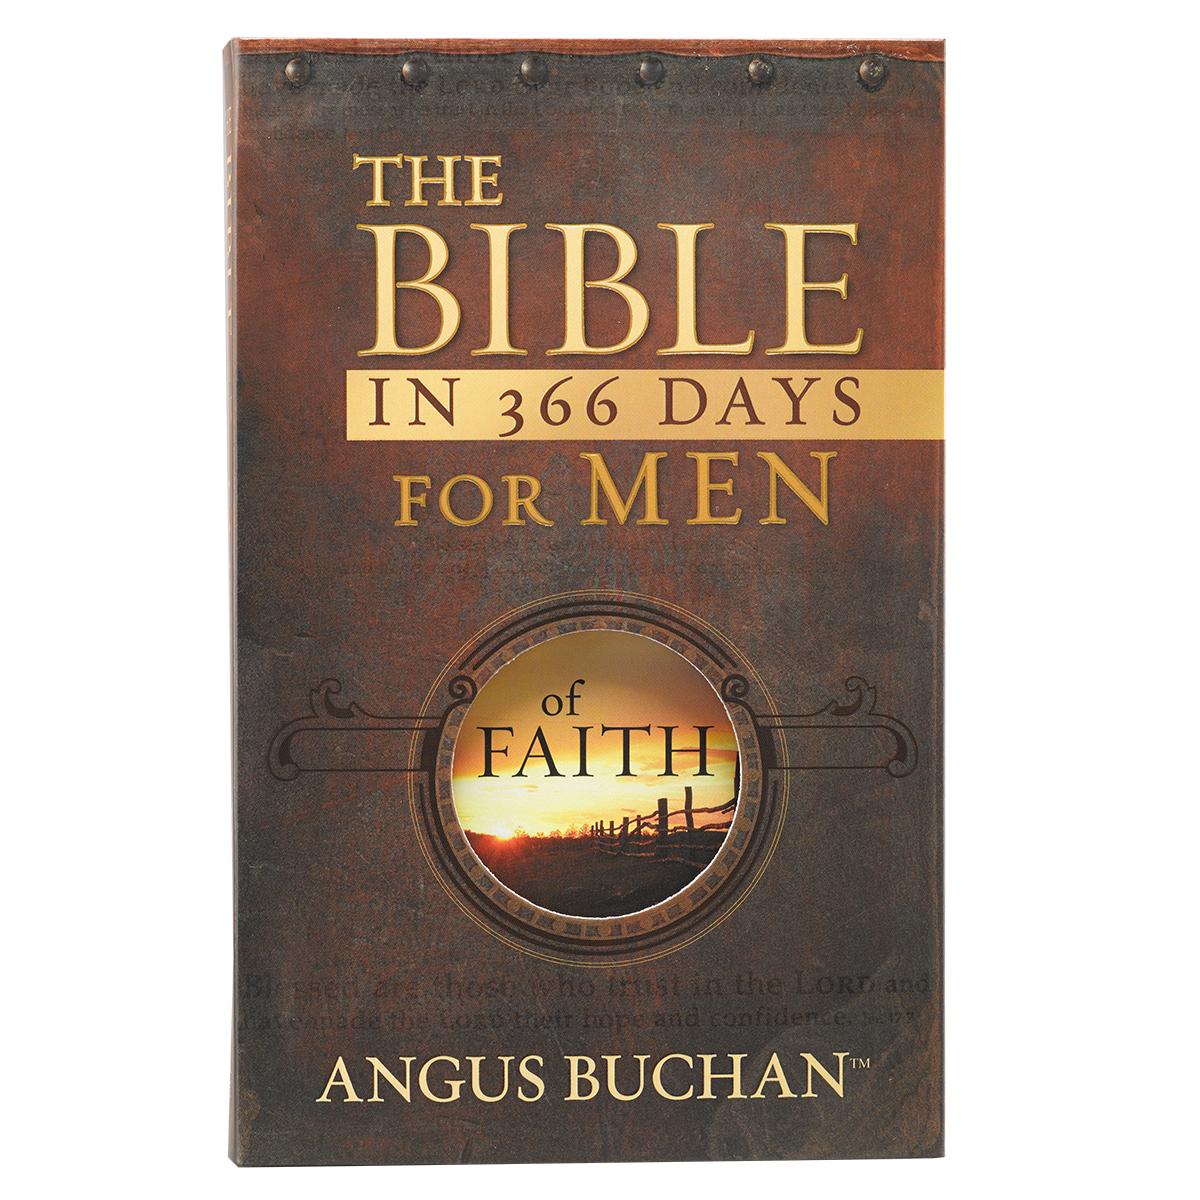 The Bible in 366 Days for Men of Faith by Angus Buchan